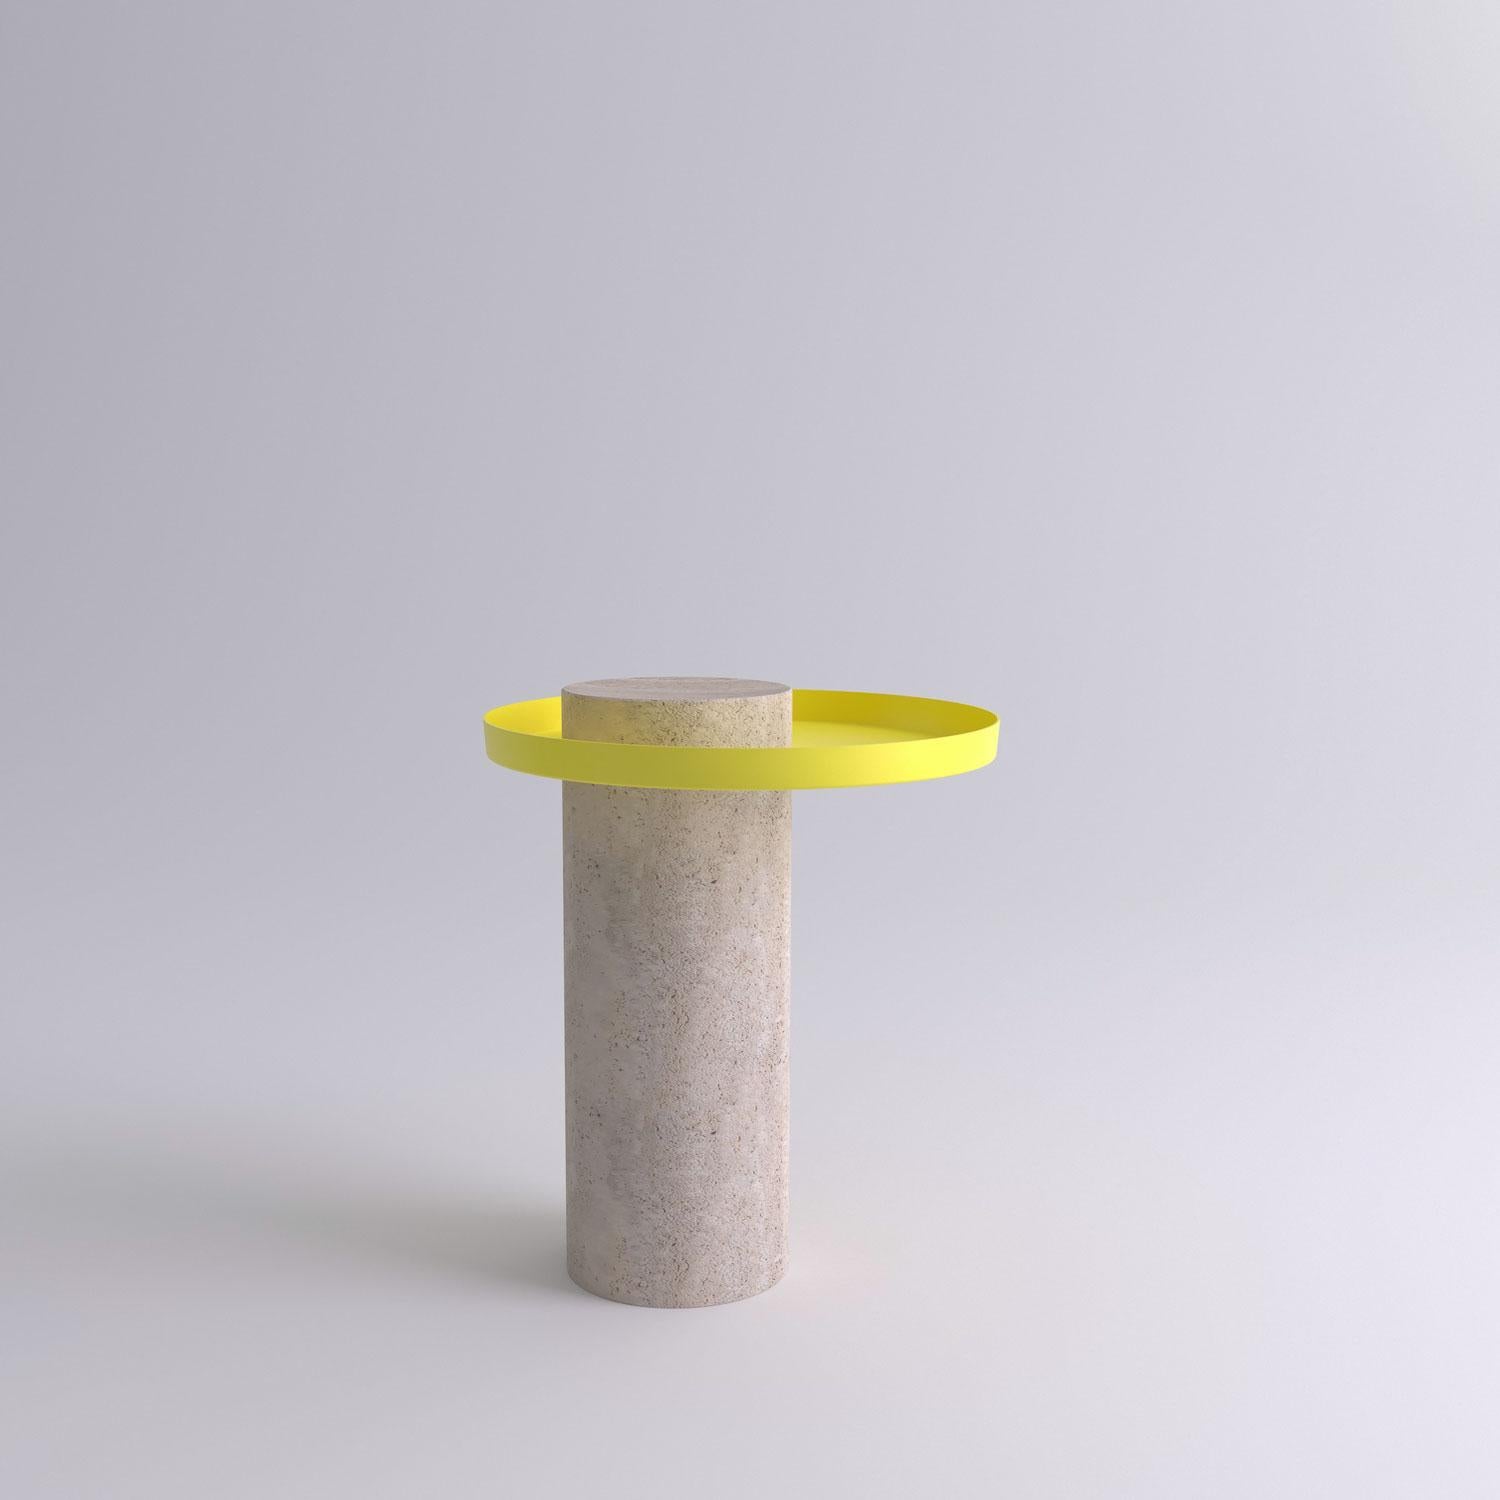 Medium travertine contemporary guéridon, Sebastian Herkner
Dimensions: D 40 x H 46 cm
Materials: Travertine stone, yellow metal tray

The salute table exists in 3 sizes, 4 different marble stones for the column and 5 different finishes for the